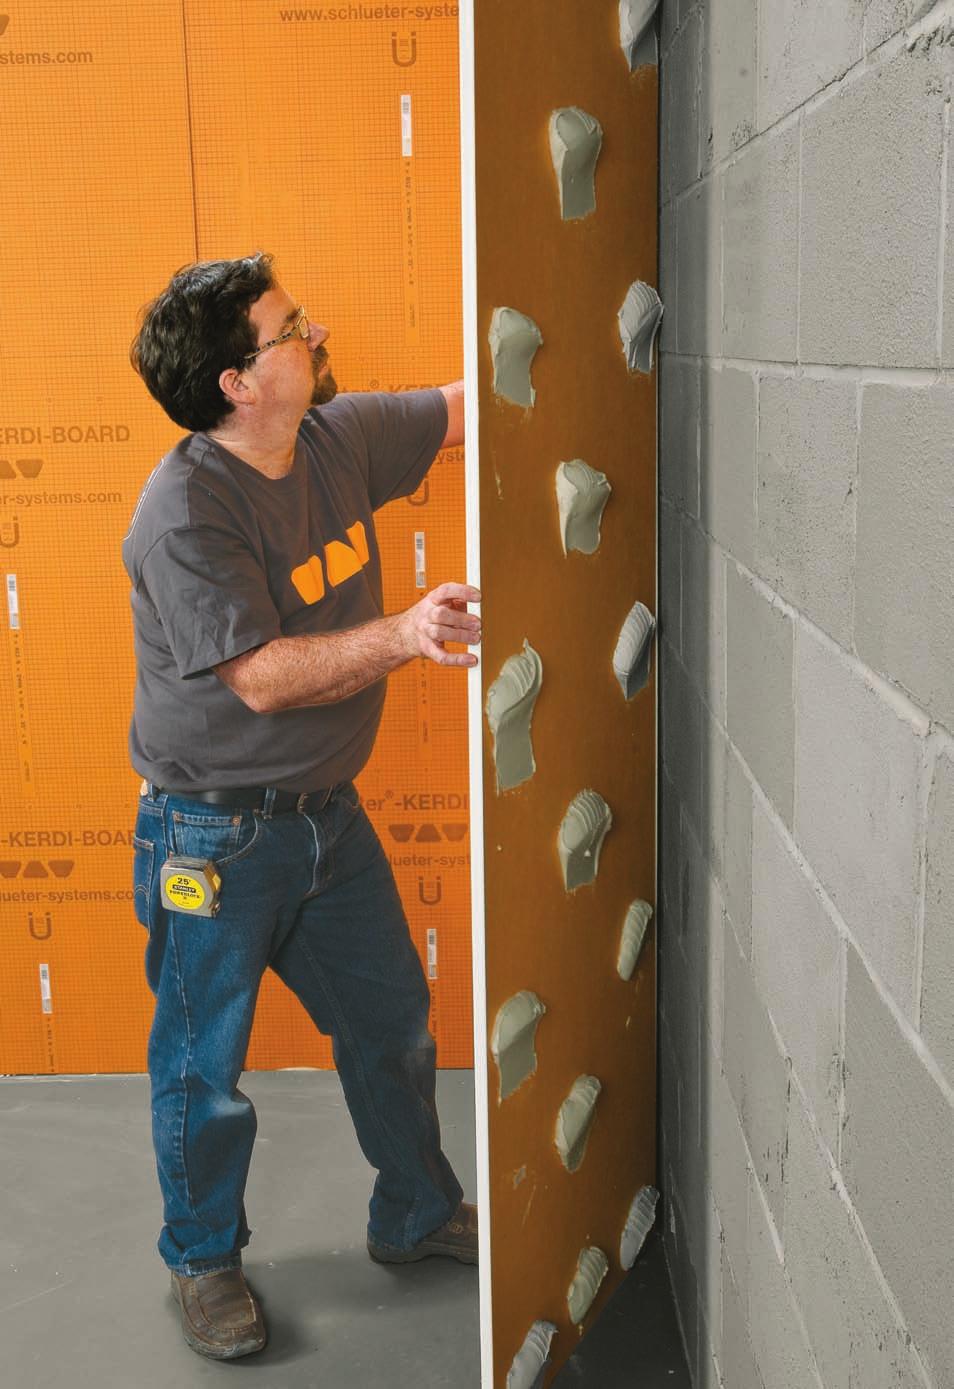 Ideal tle substrate over masonry or exstng/mxed substrates Uneven substrates Installng tles usng the thn-set